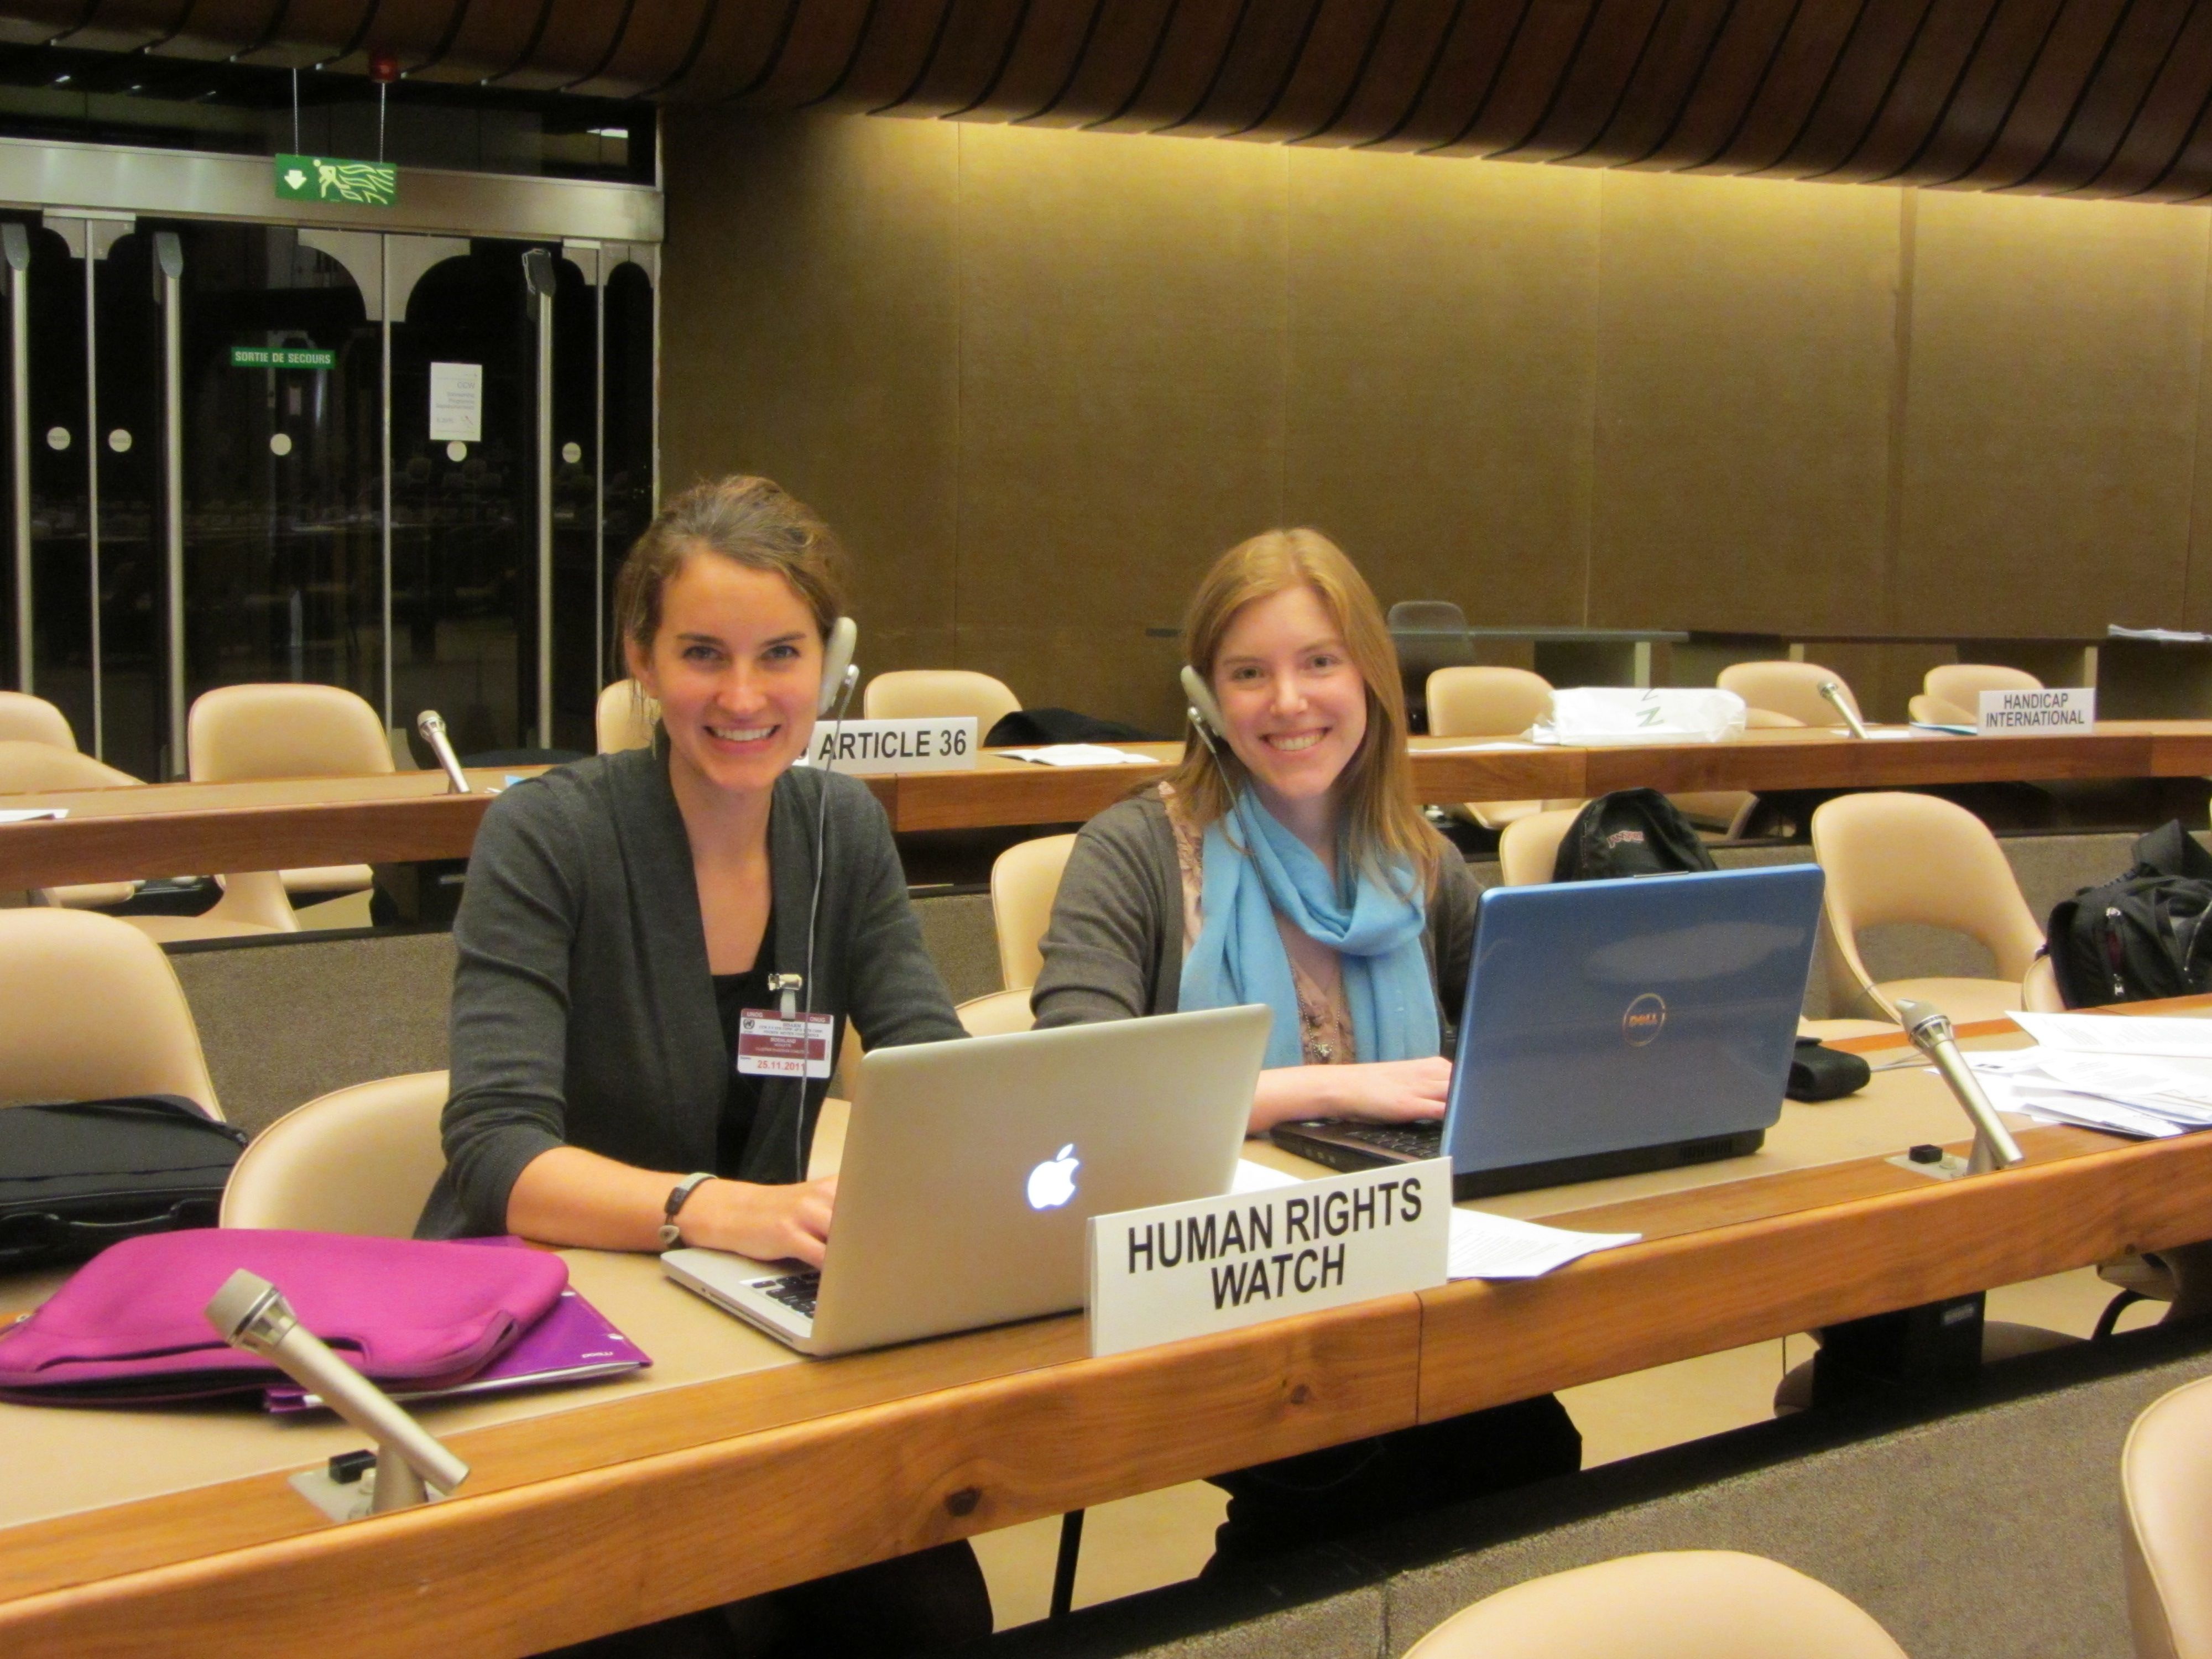 Two women wear headsets in front of computers in a conference setting. A tag saying "Human Rights Watch" sits in front of them designating them as representatives of the NGO.